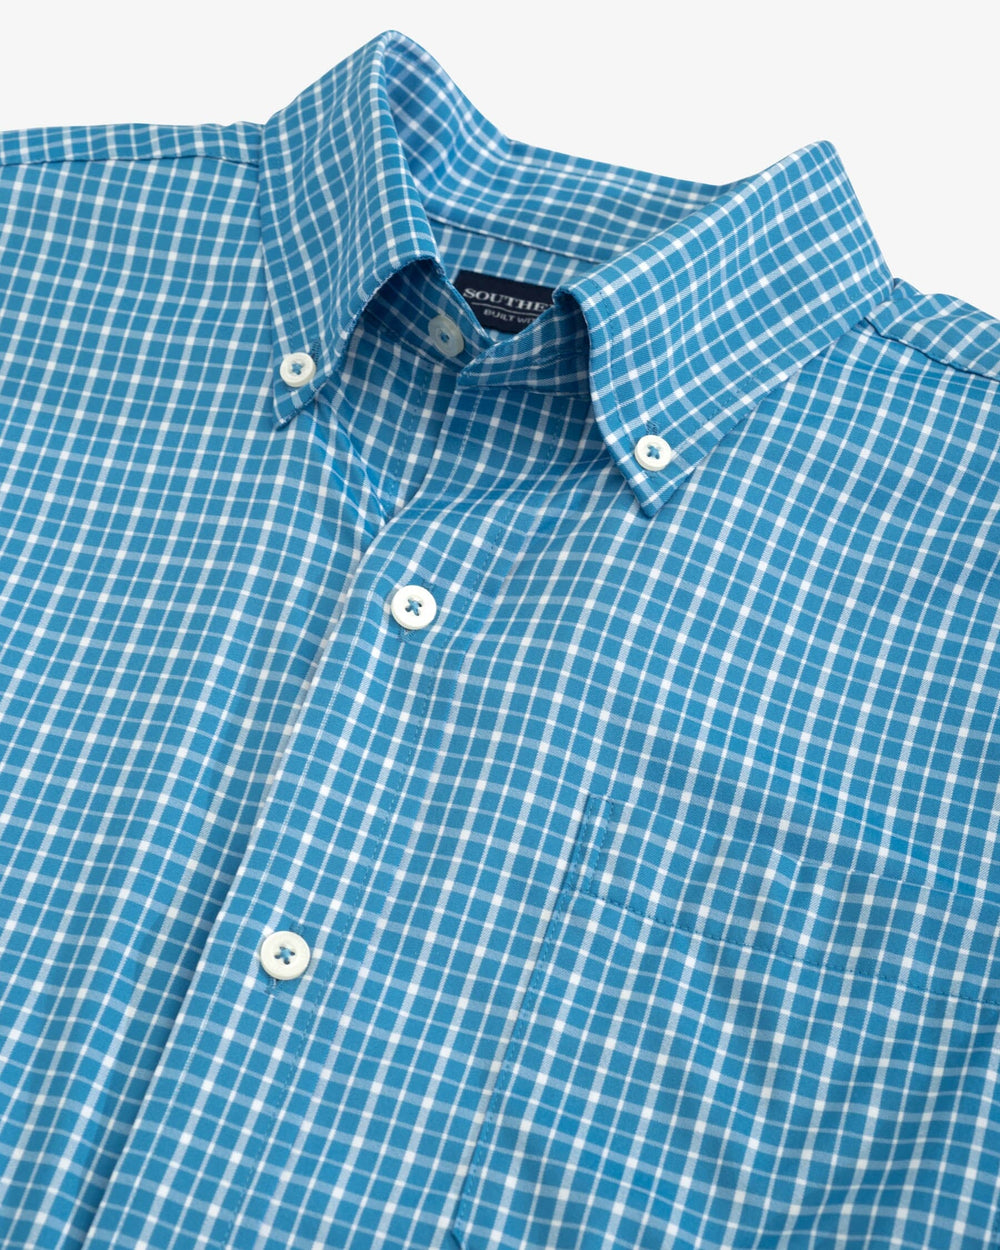 The detail view of the Southern Tide brrr Charleston Beaumont Plaid Intercoastal Sport Shirt by Southern Tide - Atlantic Blue